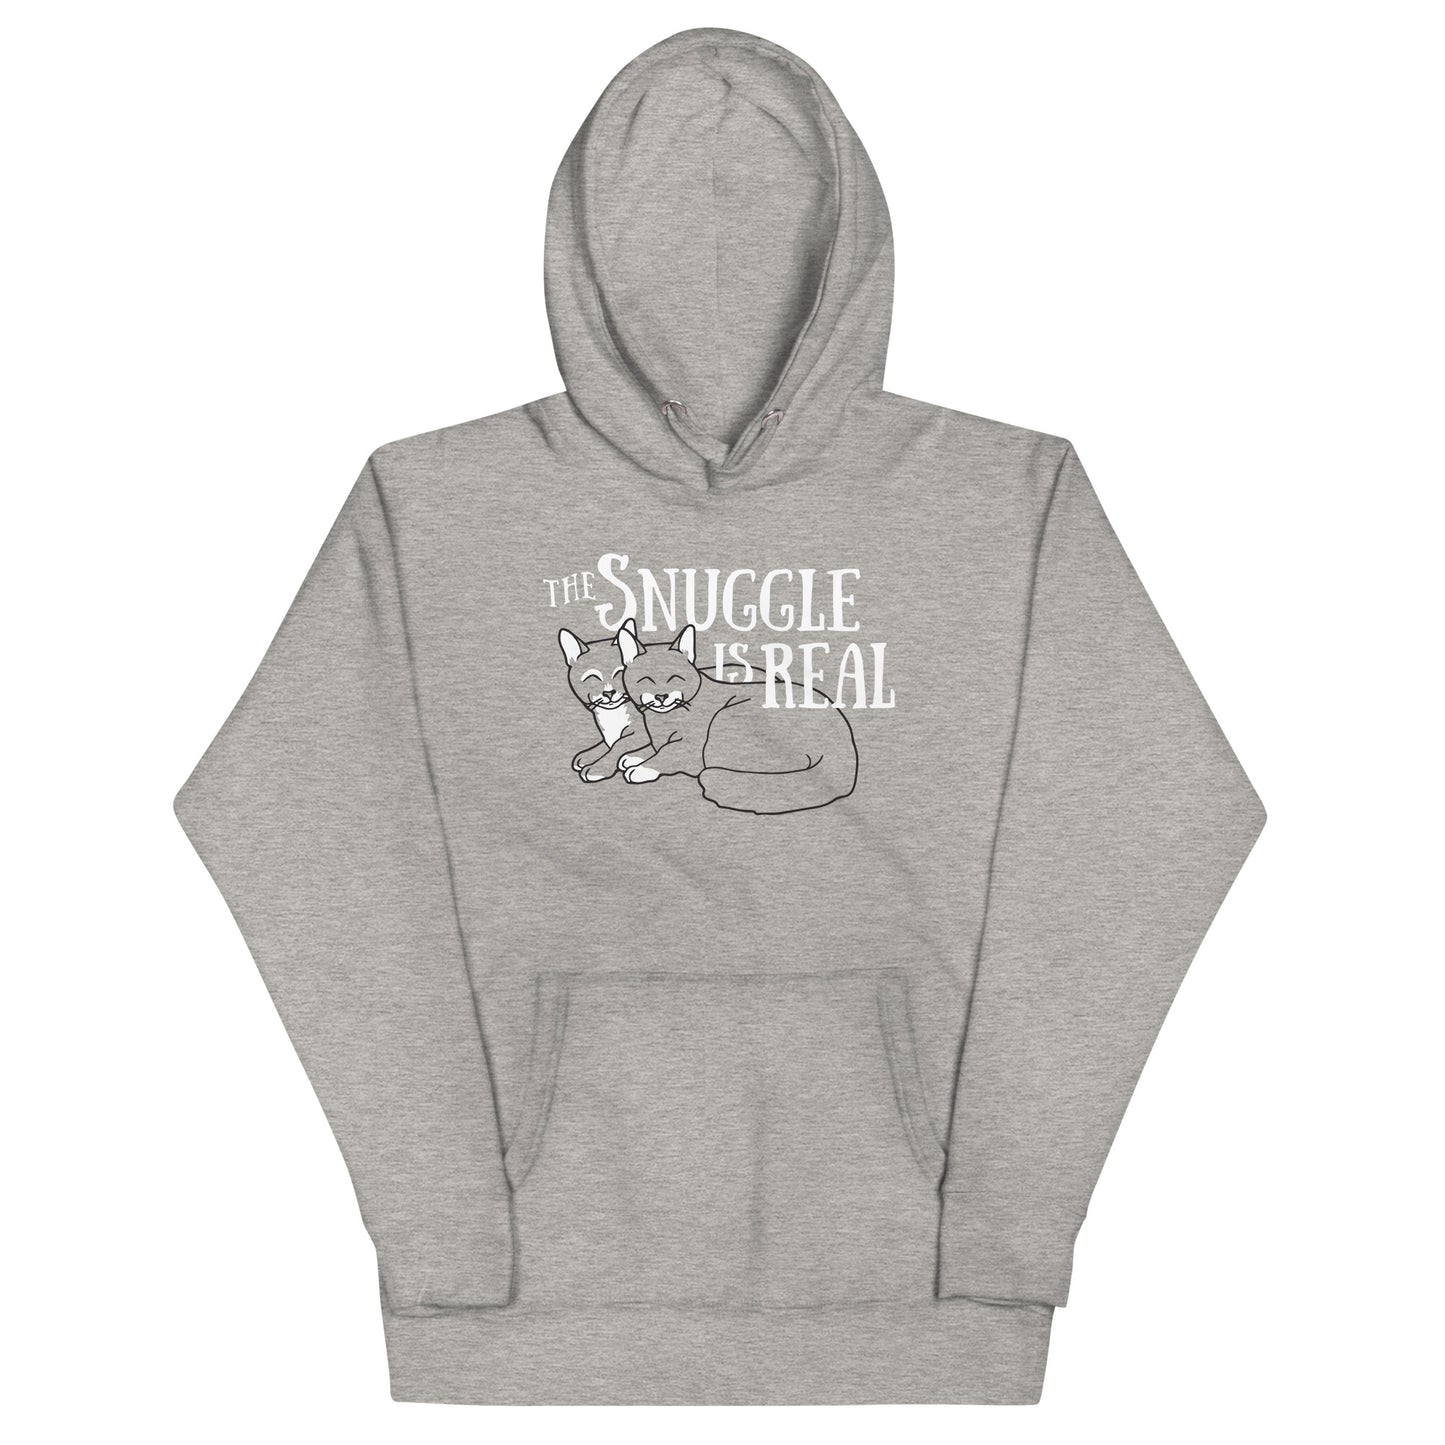 The Snuggle Is Real Unisex Hoodie